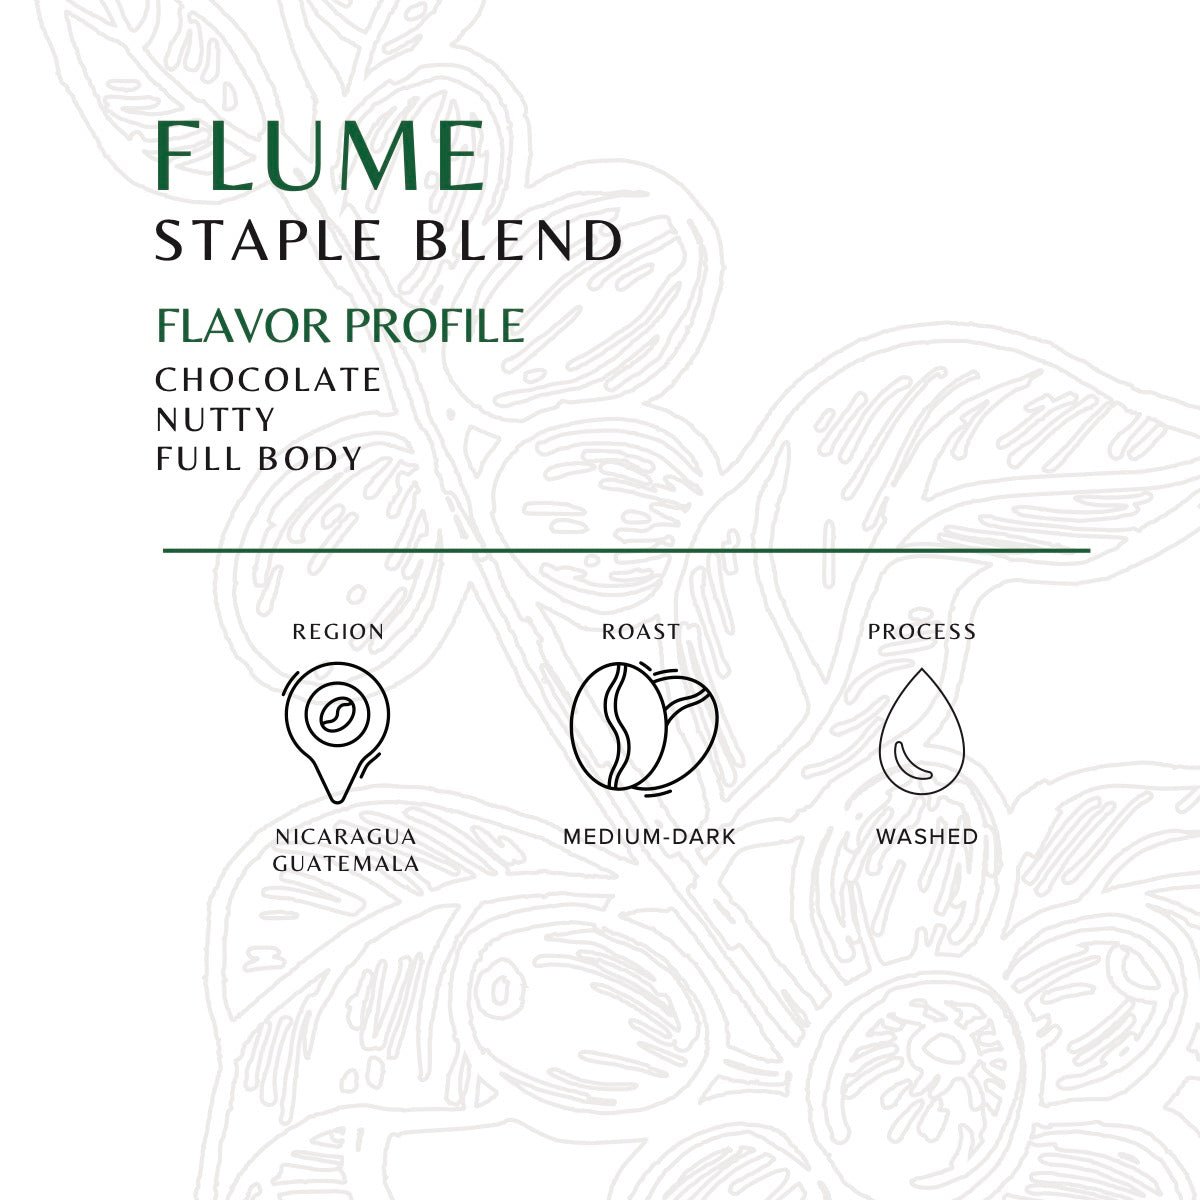 Flume - Old World Coffee Roasters